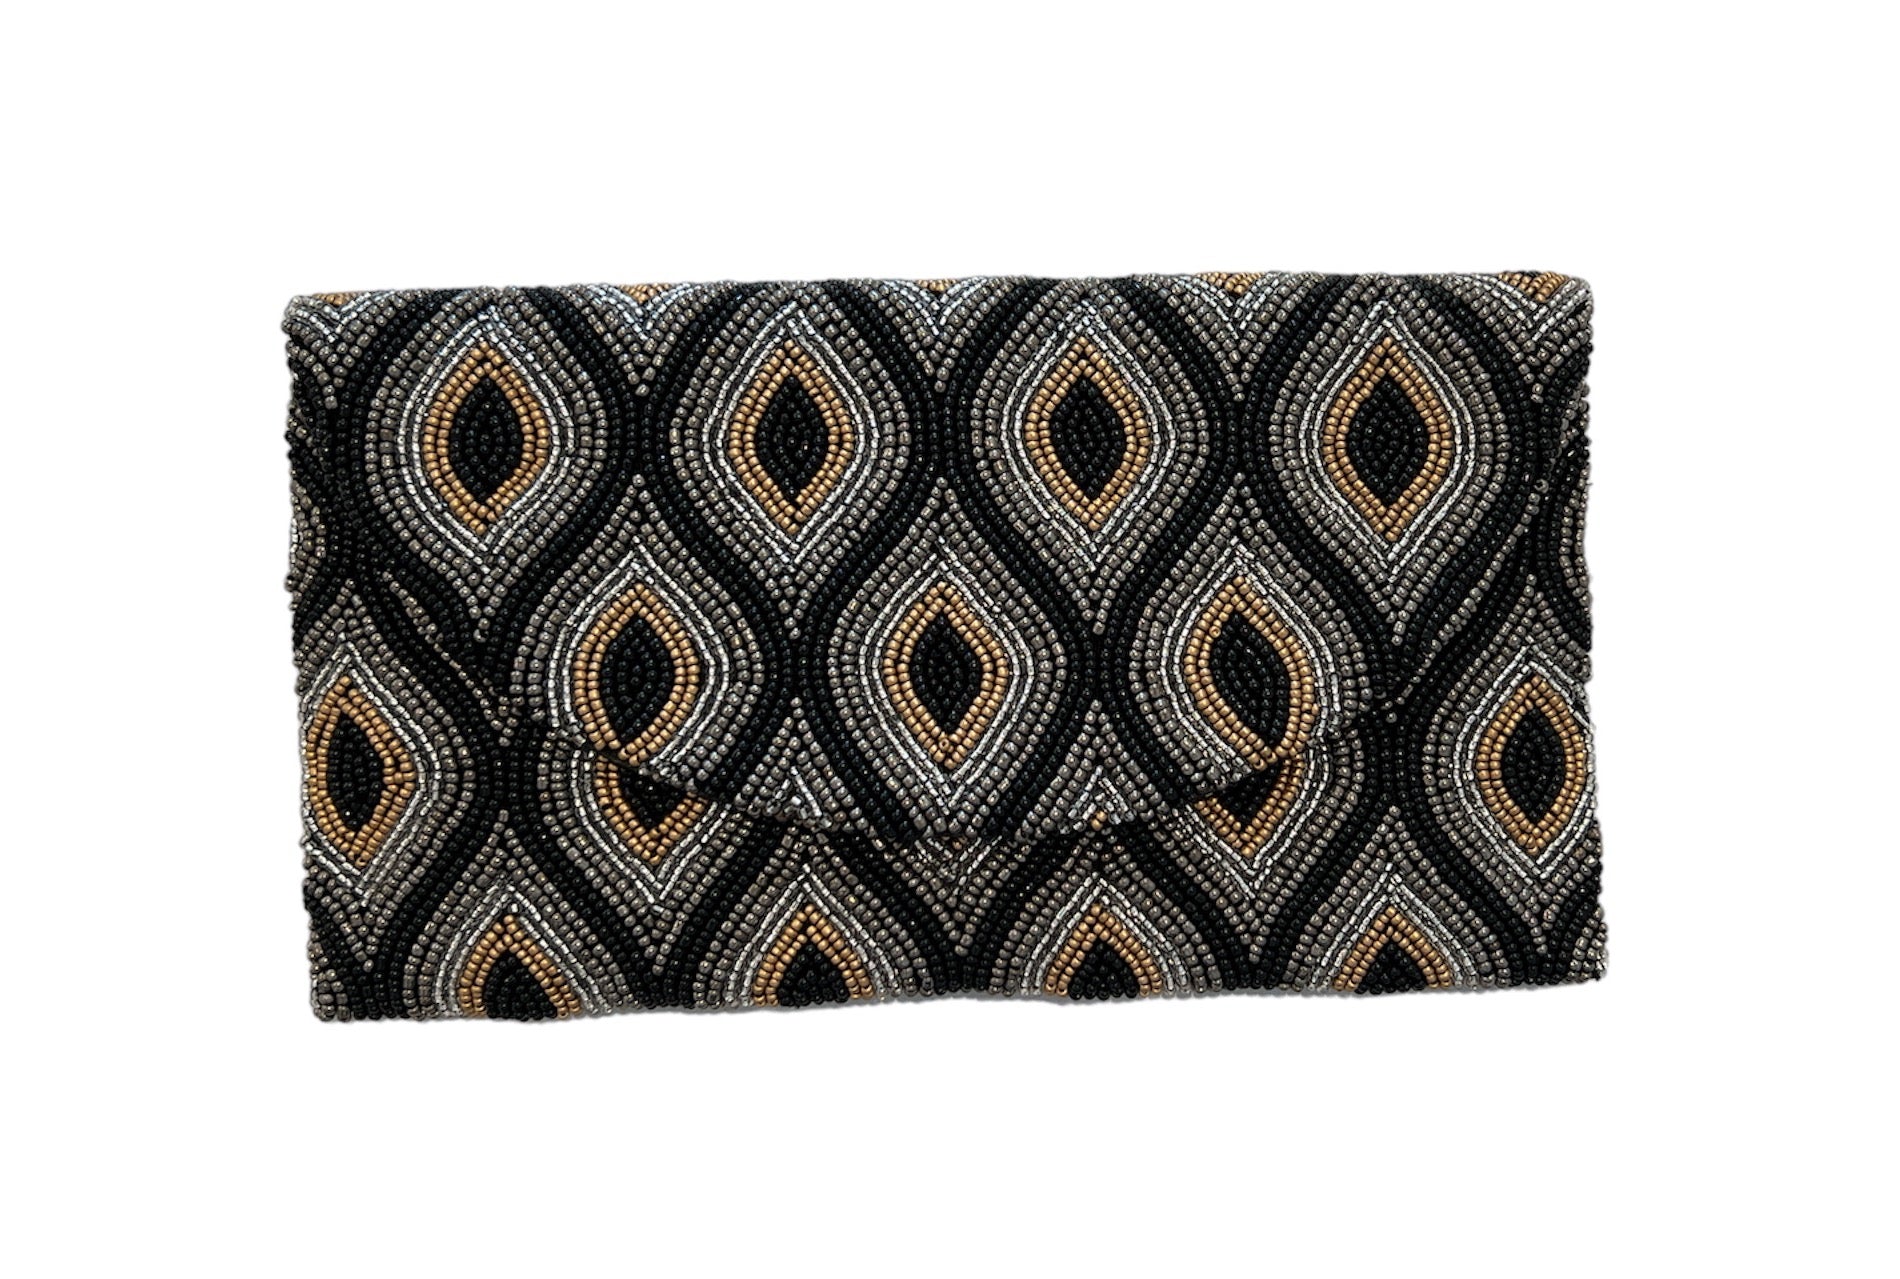 Black/Pewter/Gold/Silver Beaded Clutch